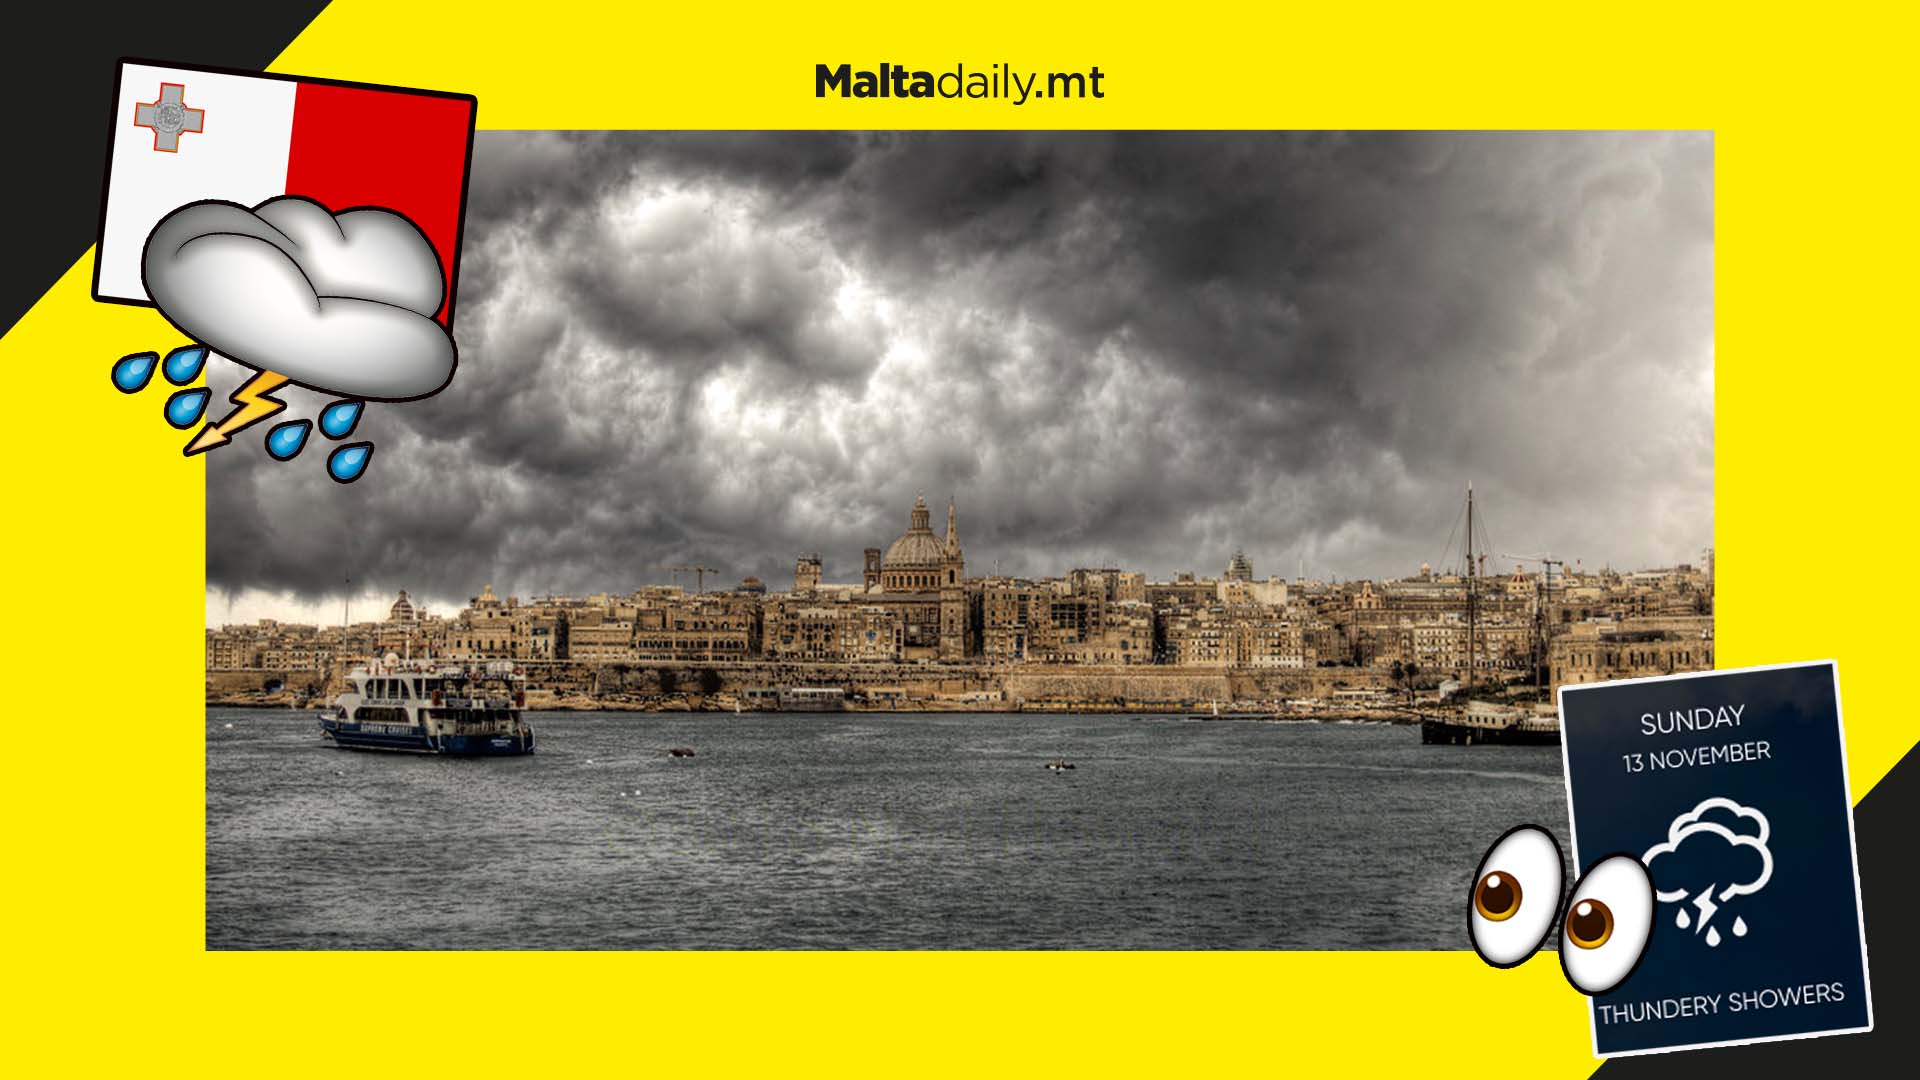 Thundery rain showers could hit Malta by this Sunday